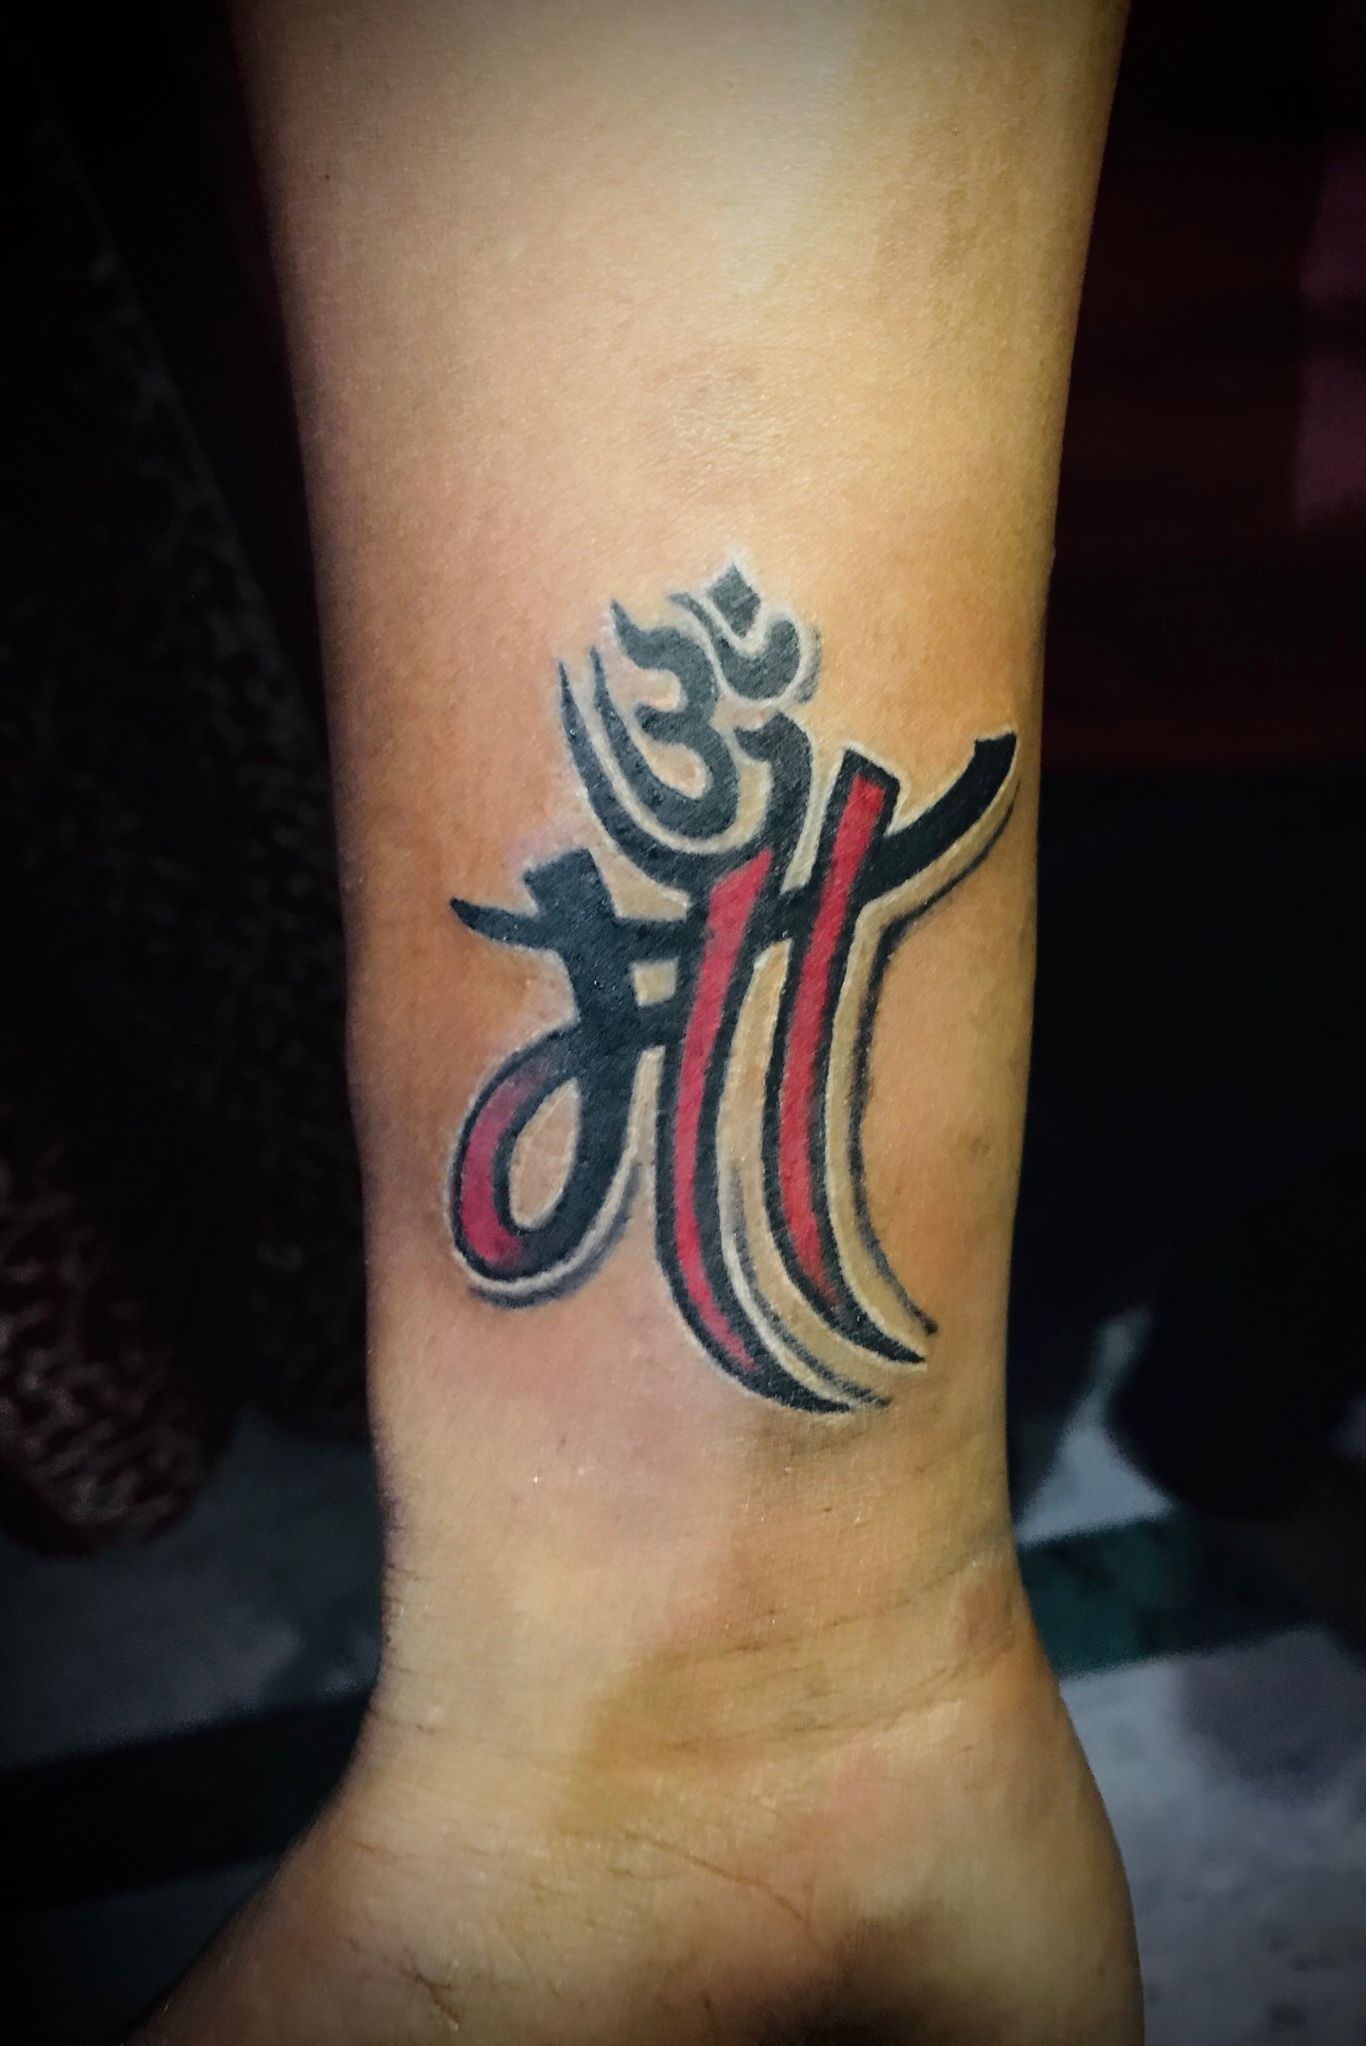 Maa Paa tattoo at Rs 150/square inch in Kota | ID: 23357815148